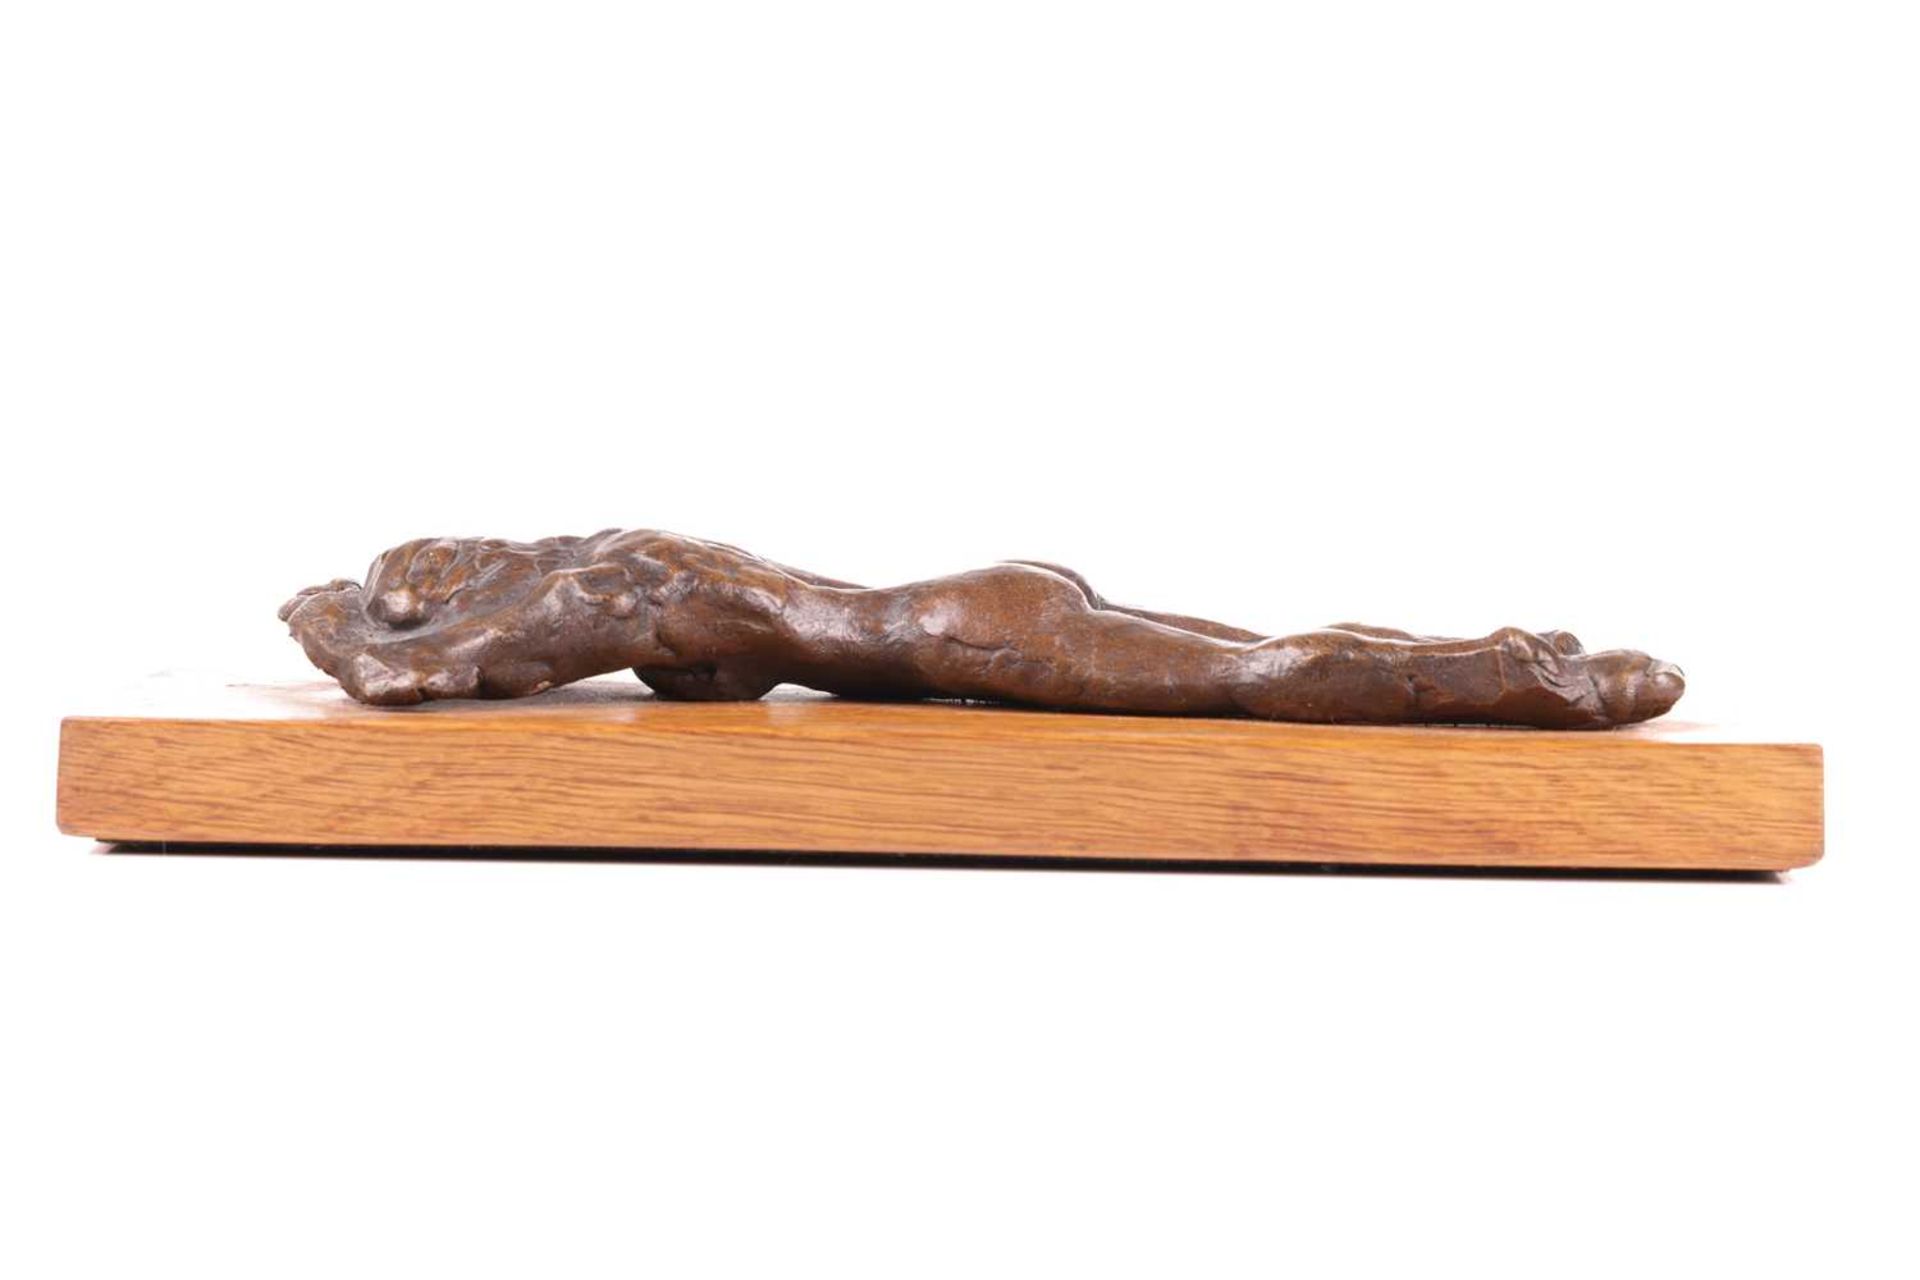 John Doubleday (b.1947), a patinated bronze study of a recumbent female nude, lying face down, on - Image 3 of 5